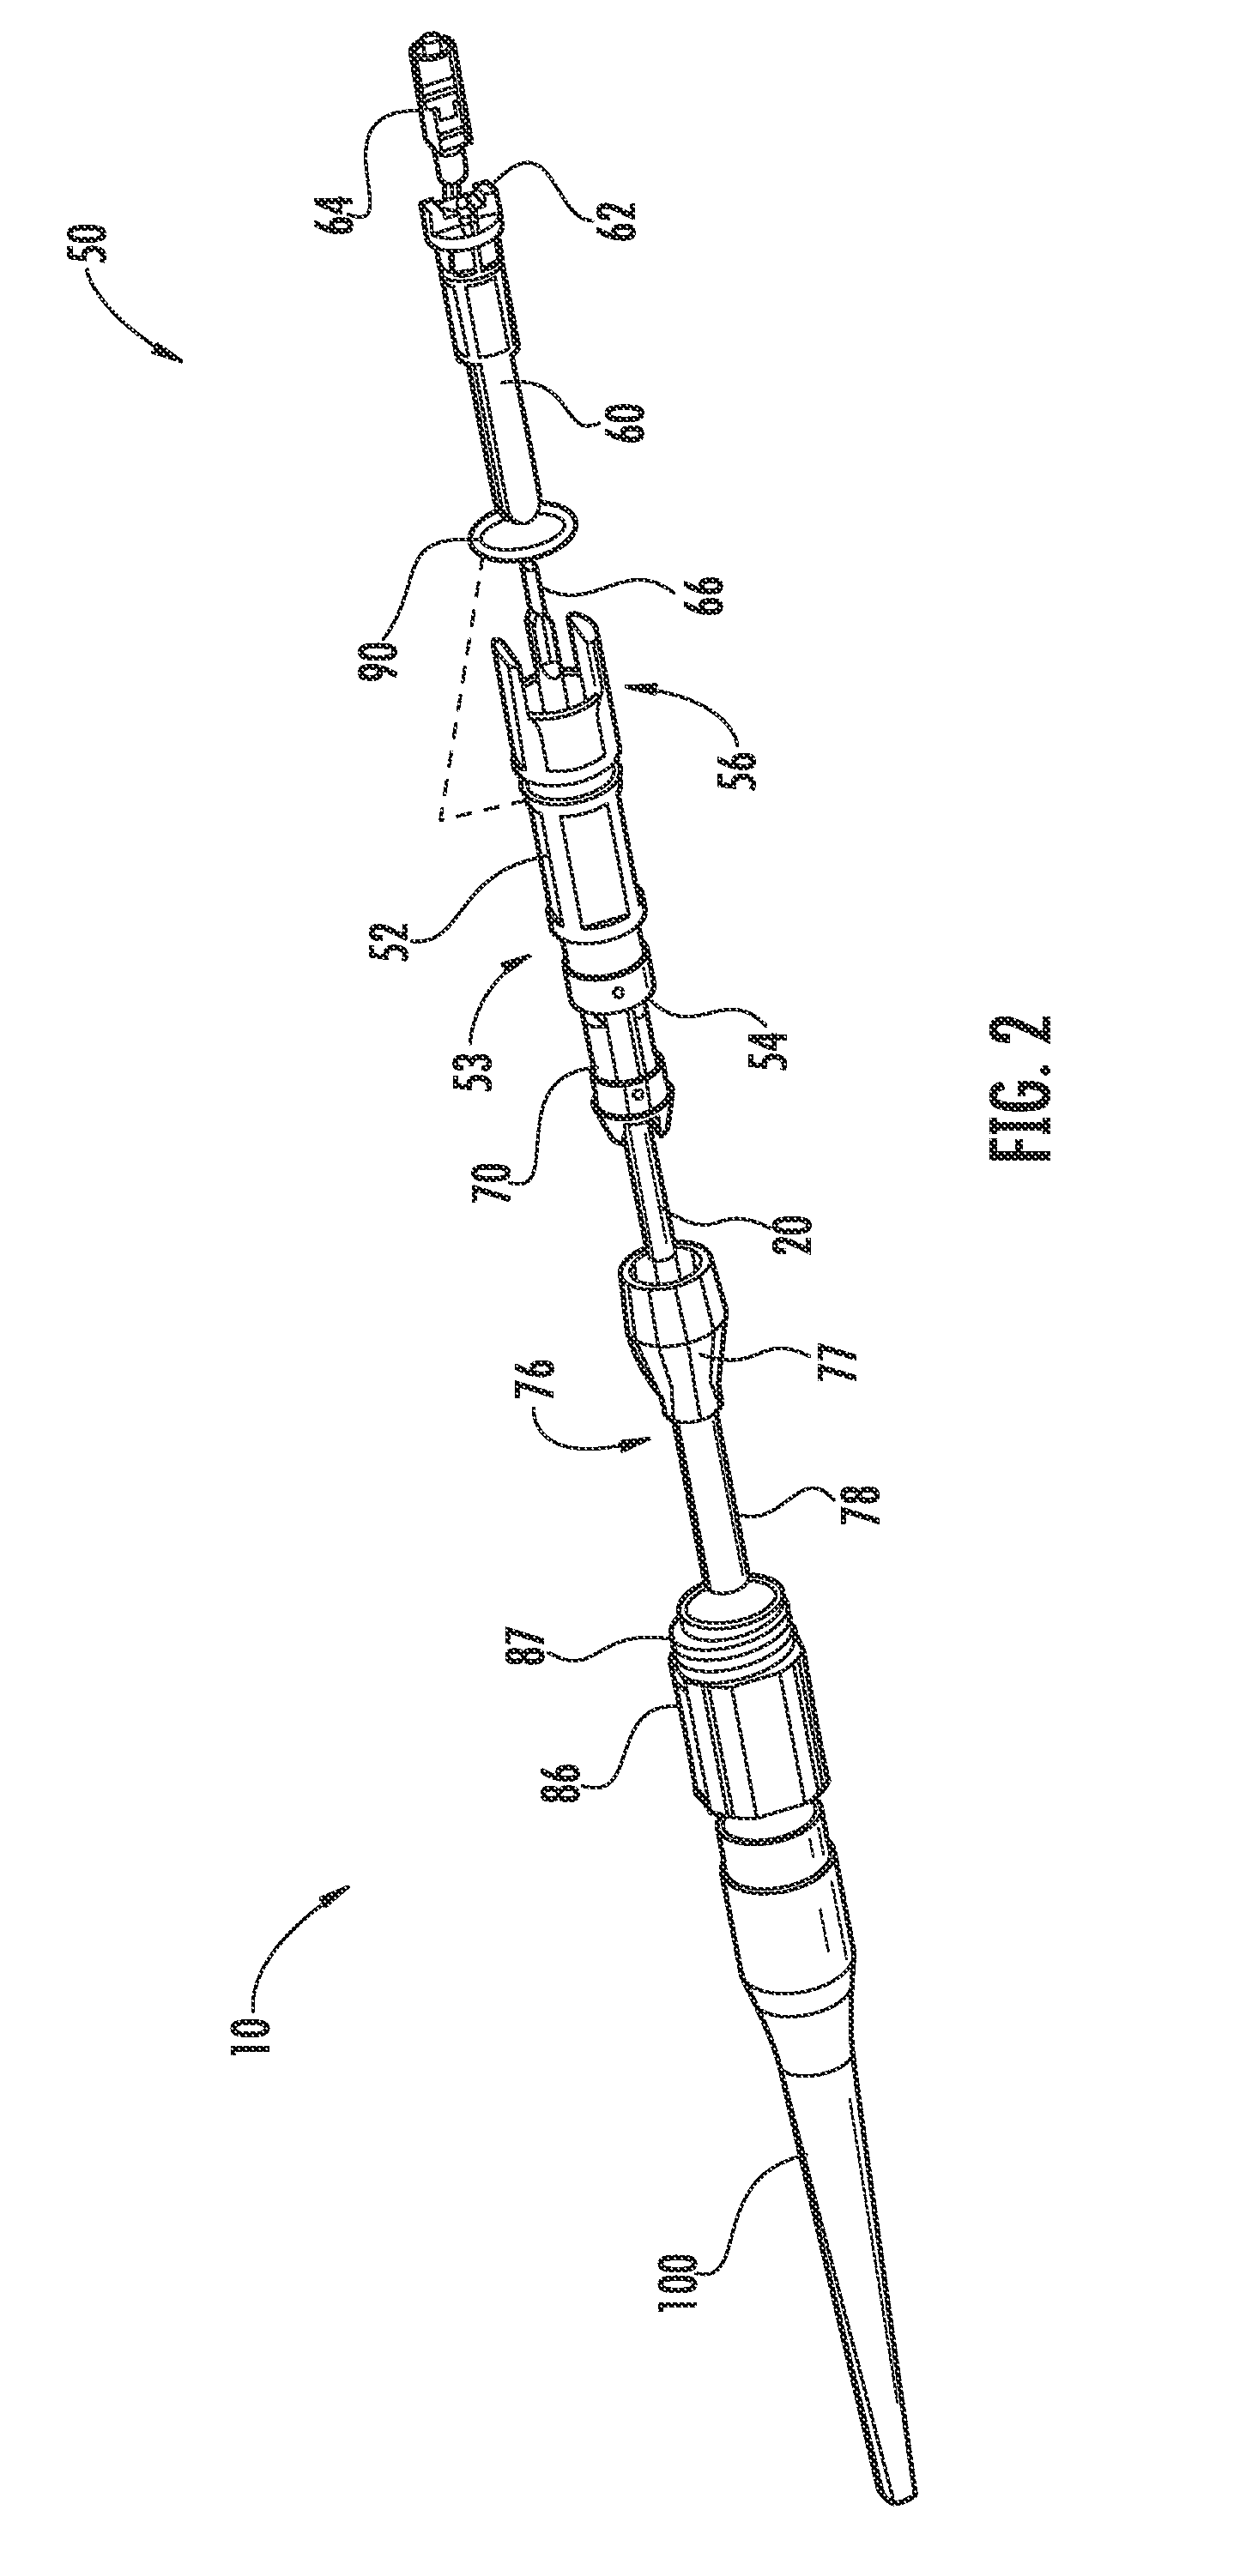 Strain-releif member and fiber optic drop cable assembly using same